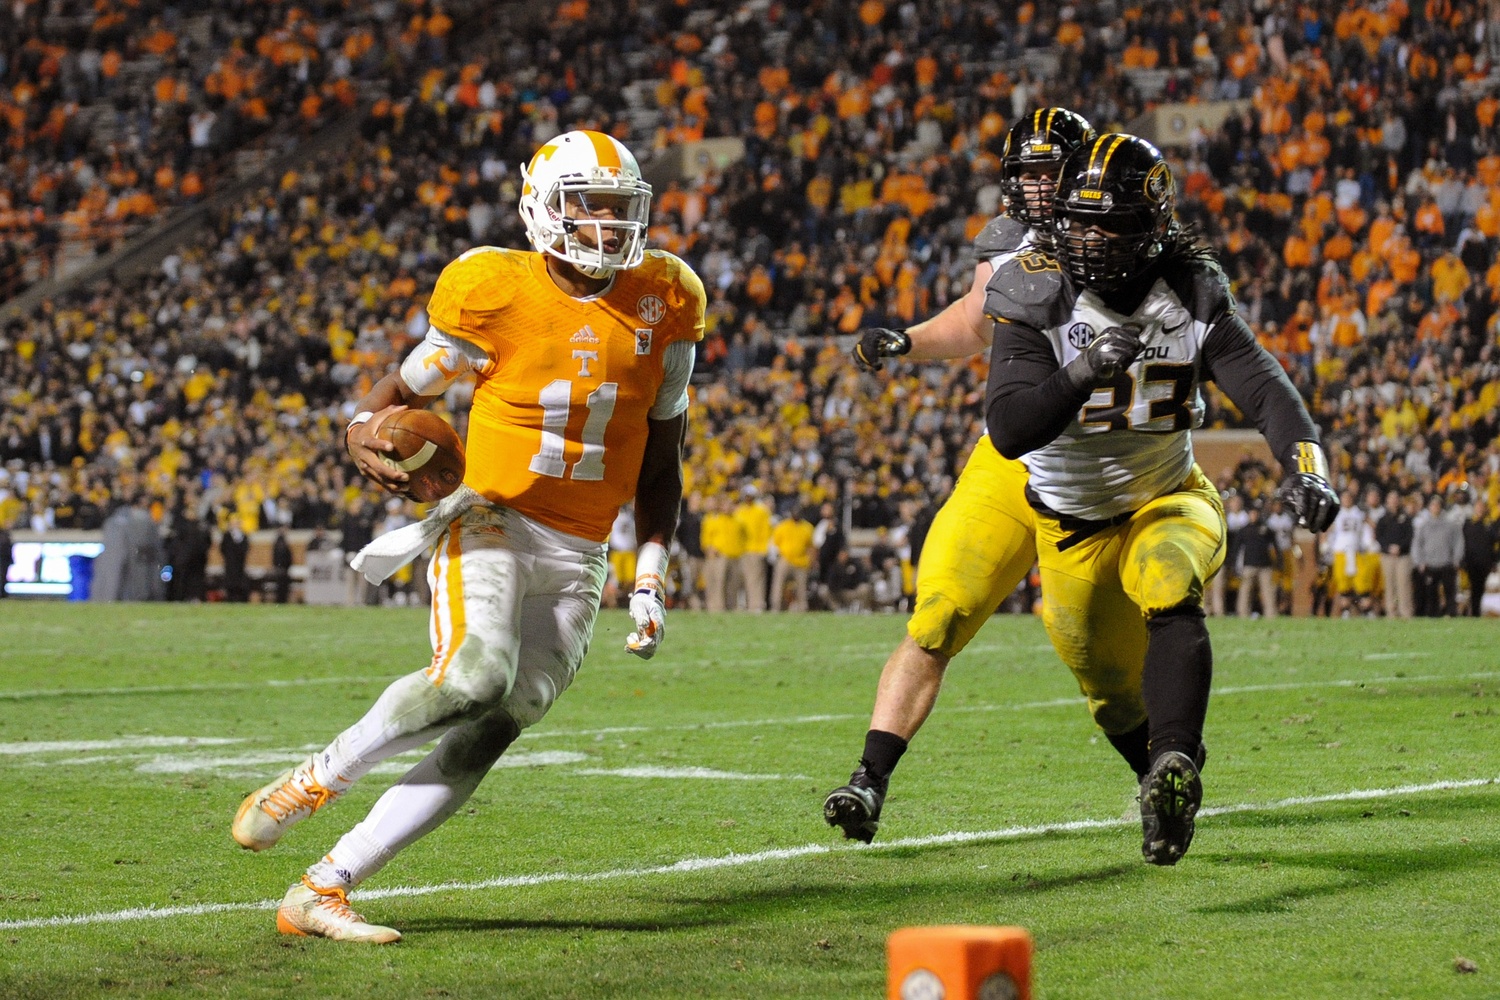 Sec Preview Final Home Game For Missouri Fb Coach Pinkel Against Tennessee Espn 981 Fm 850 